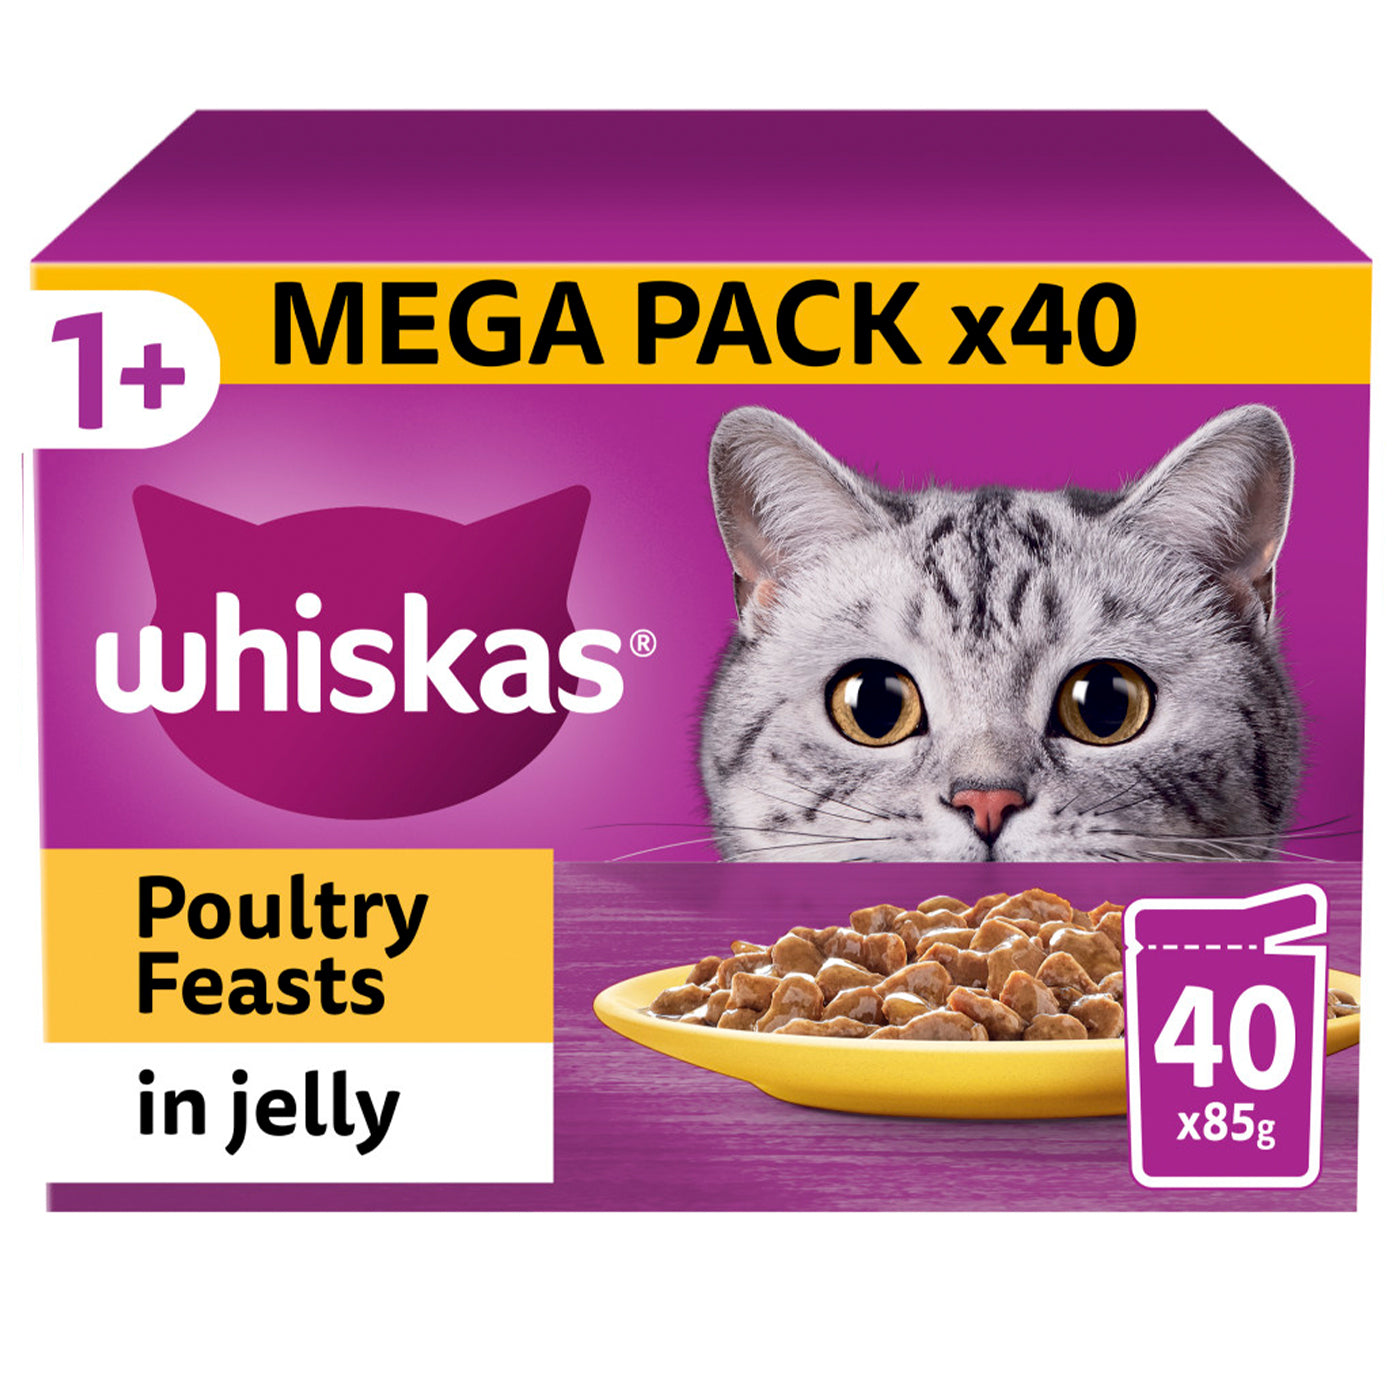 Whiskas 1+ Cat Poultry Feasts in Jelly (40x85g)